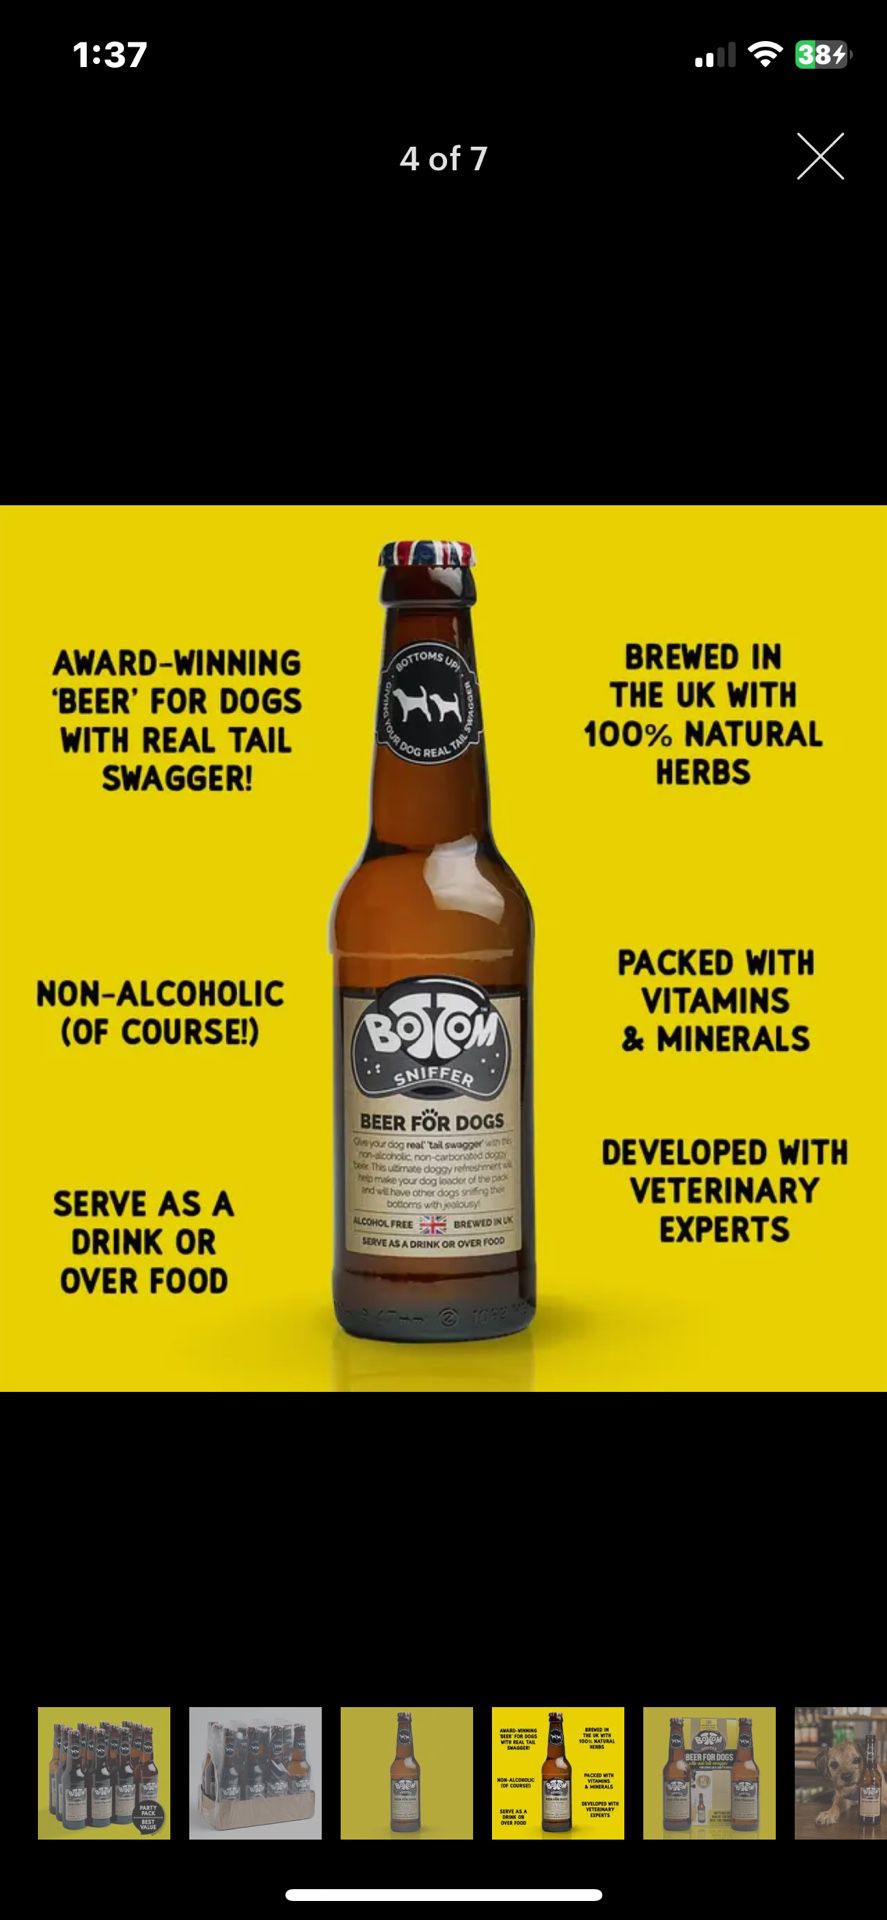 Non-alcoholic Beer For Dogs